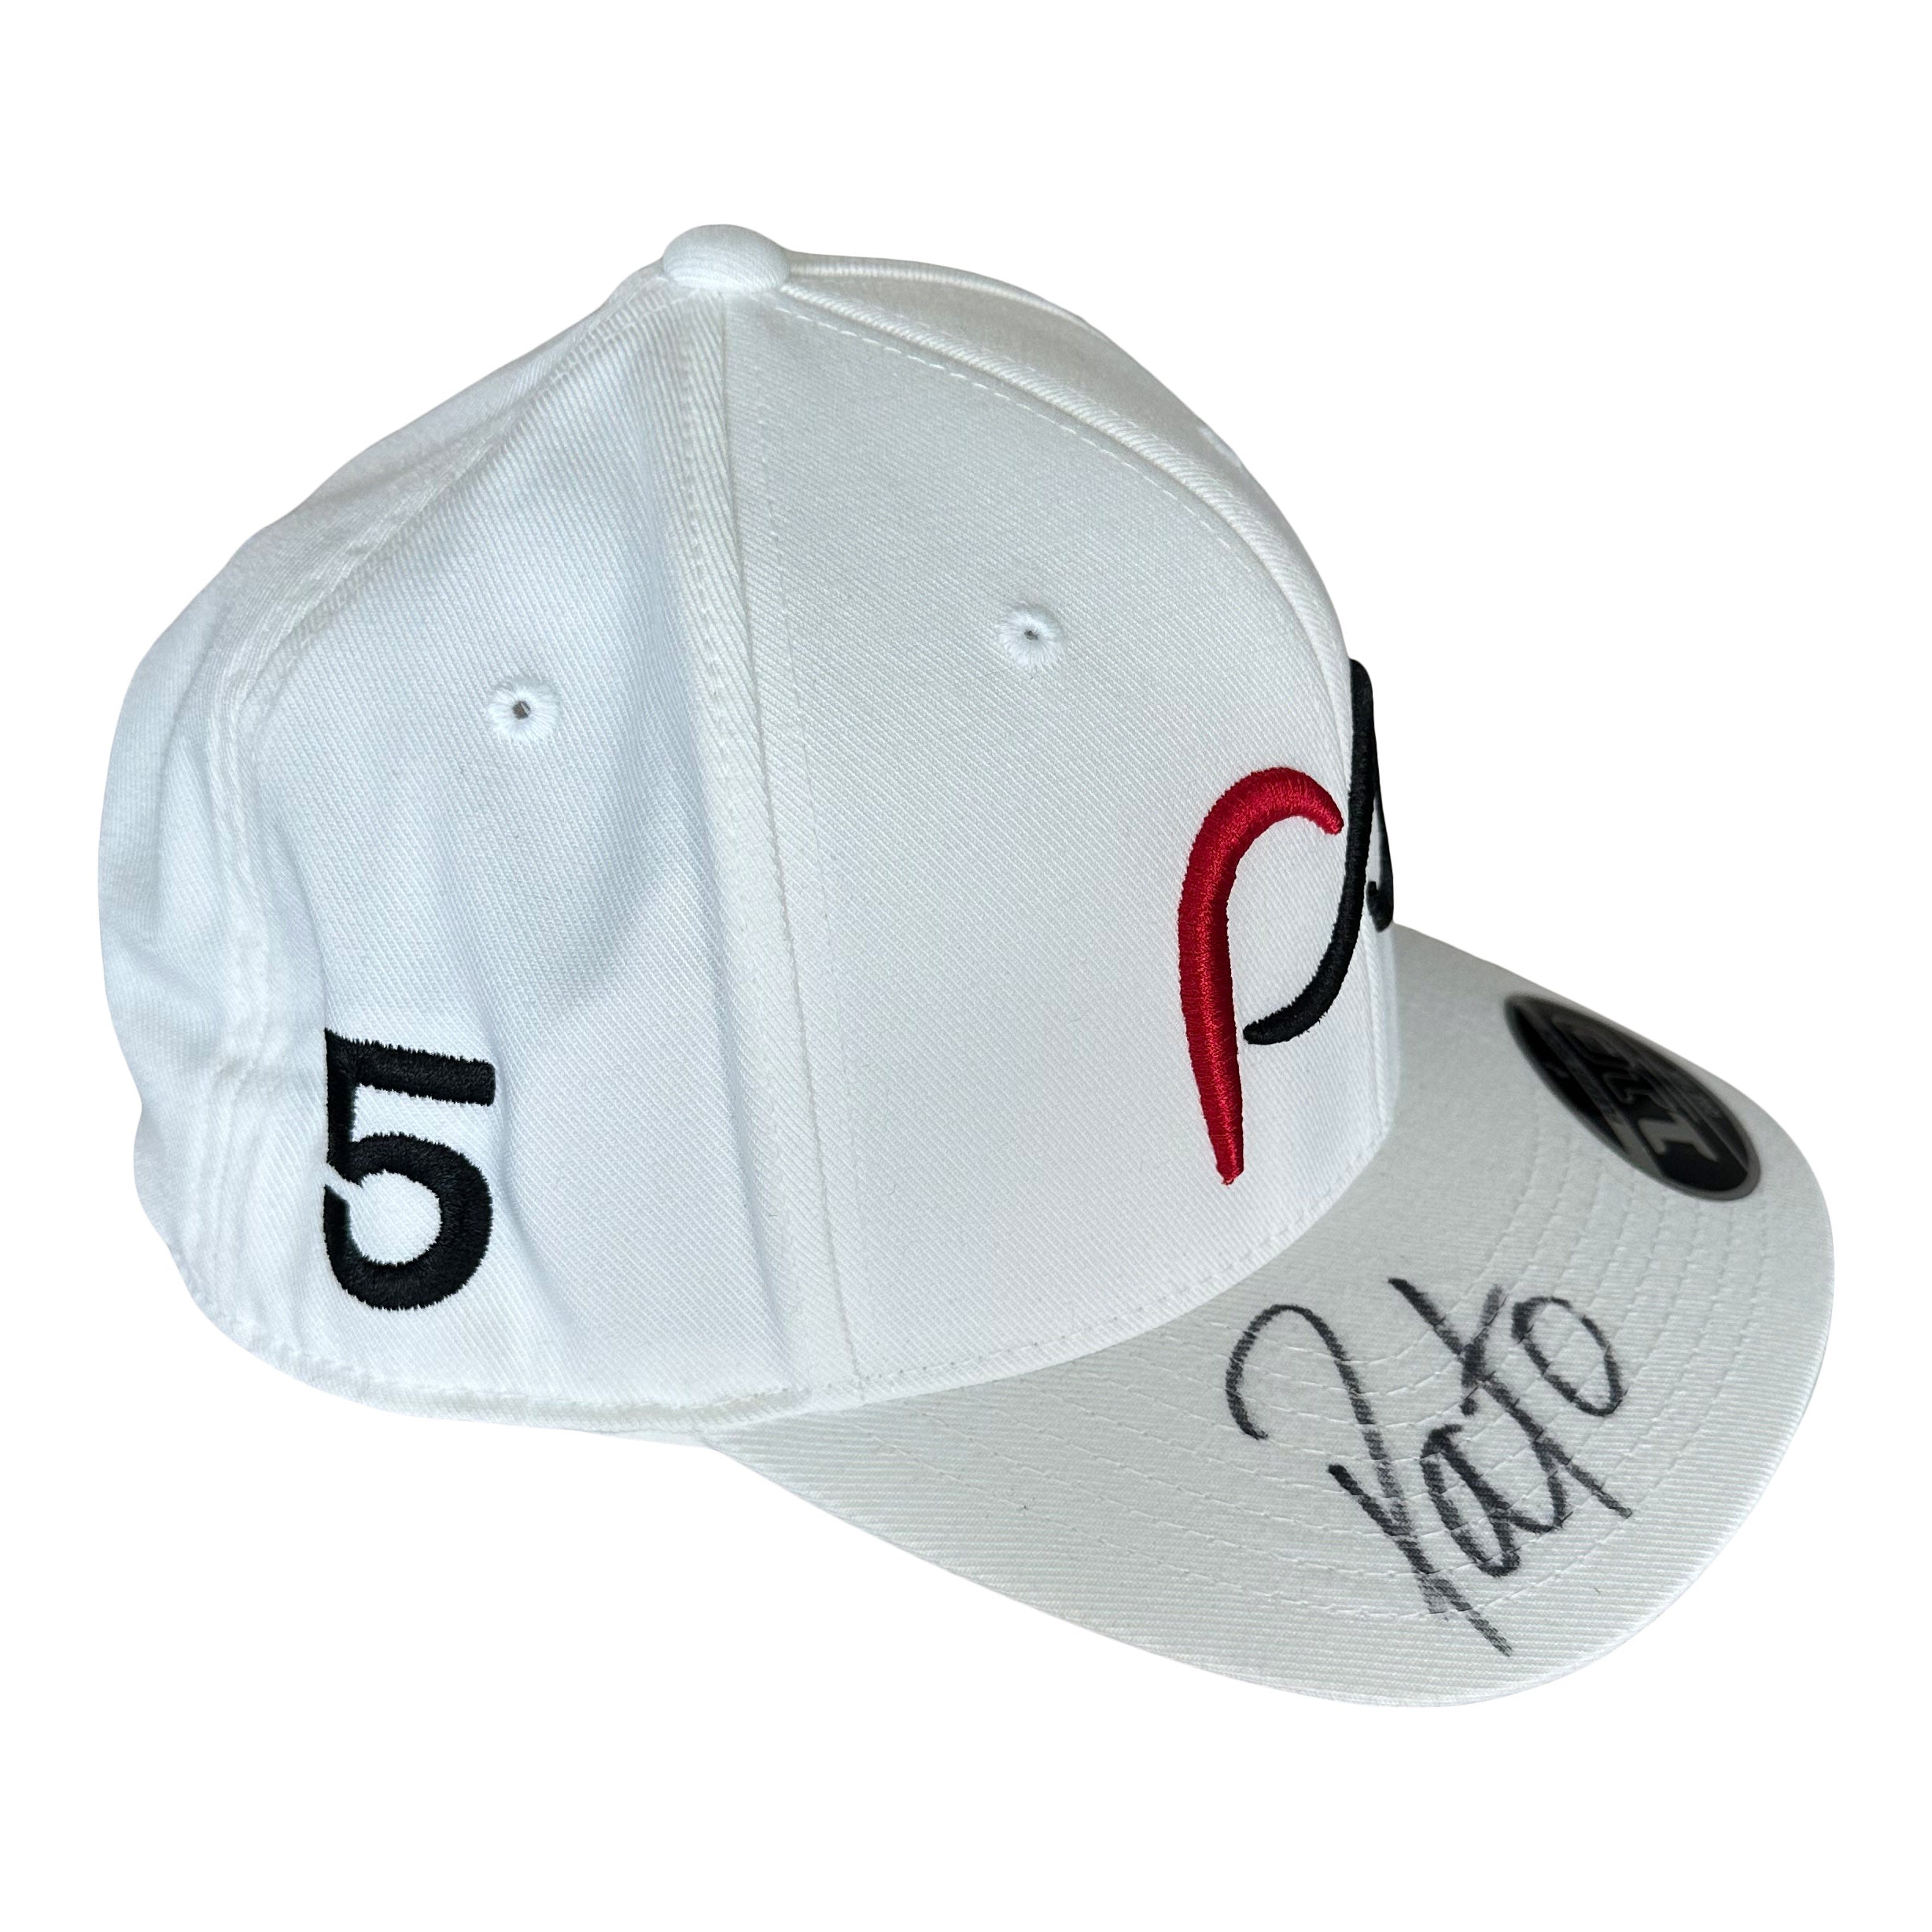 *Autographed* White Curve Bill Cap with PO logo 3D in front and #5 black on side